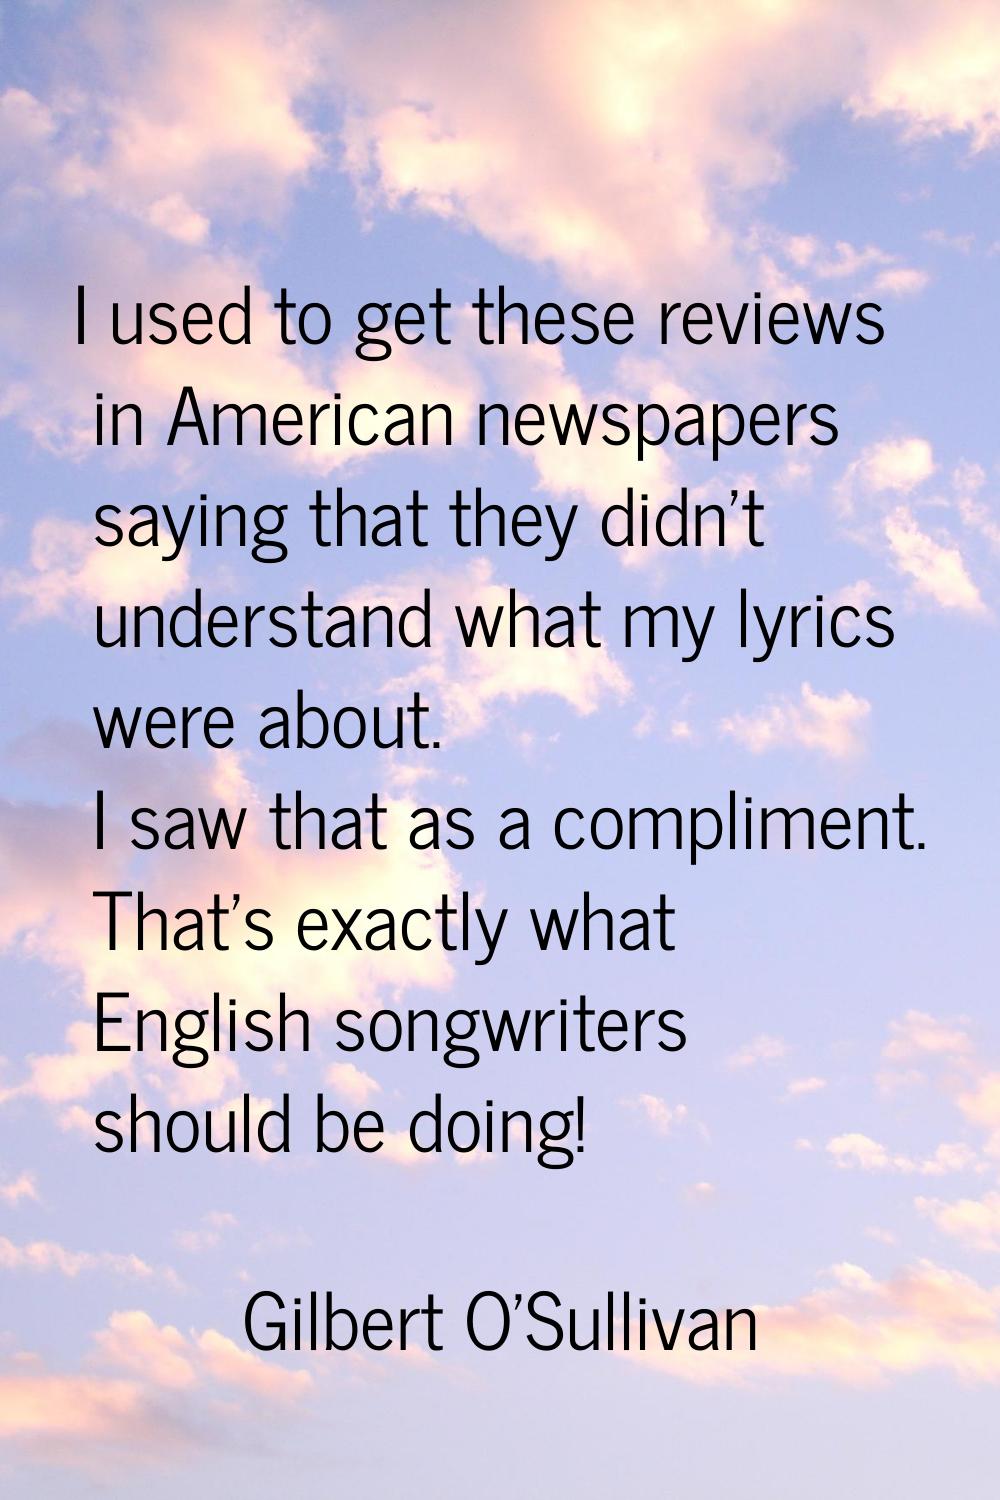 I used to get these reviews in American newspapers saying that they didn't understand what my lyric